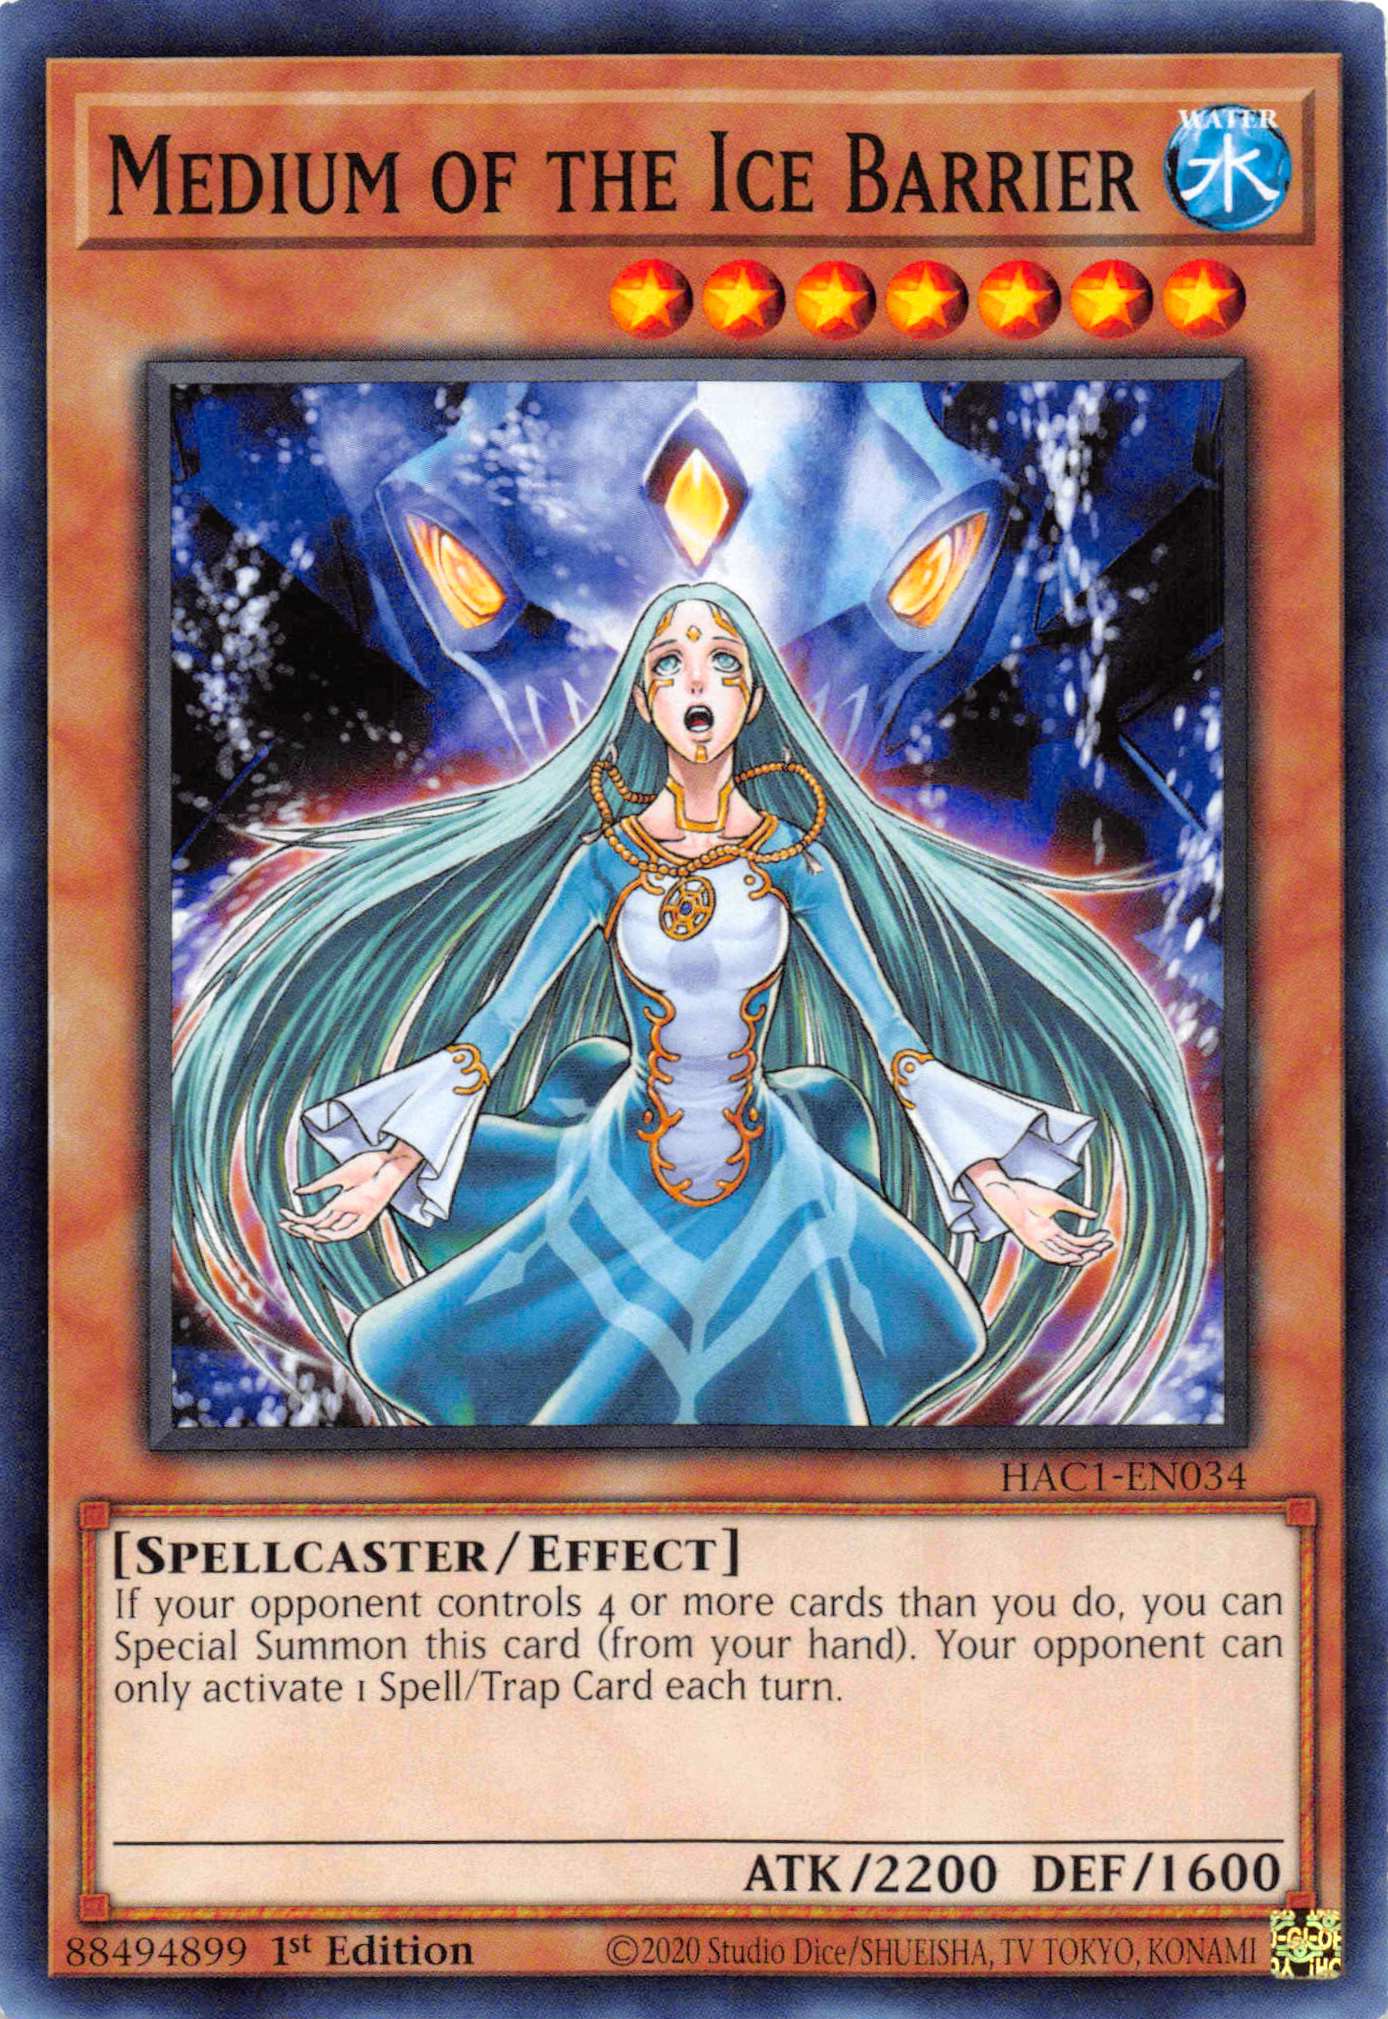 Medium of the Ice Barrier (Duel Terminal) [HAC1-EN034] Parallel Rare | North of Exile Games